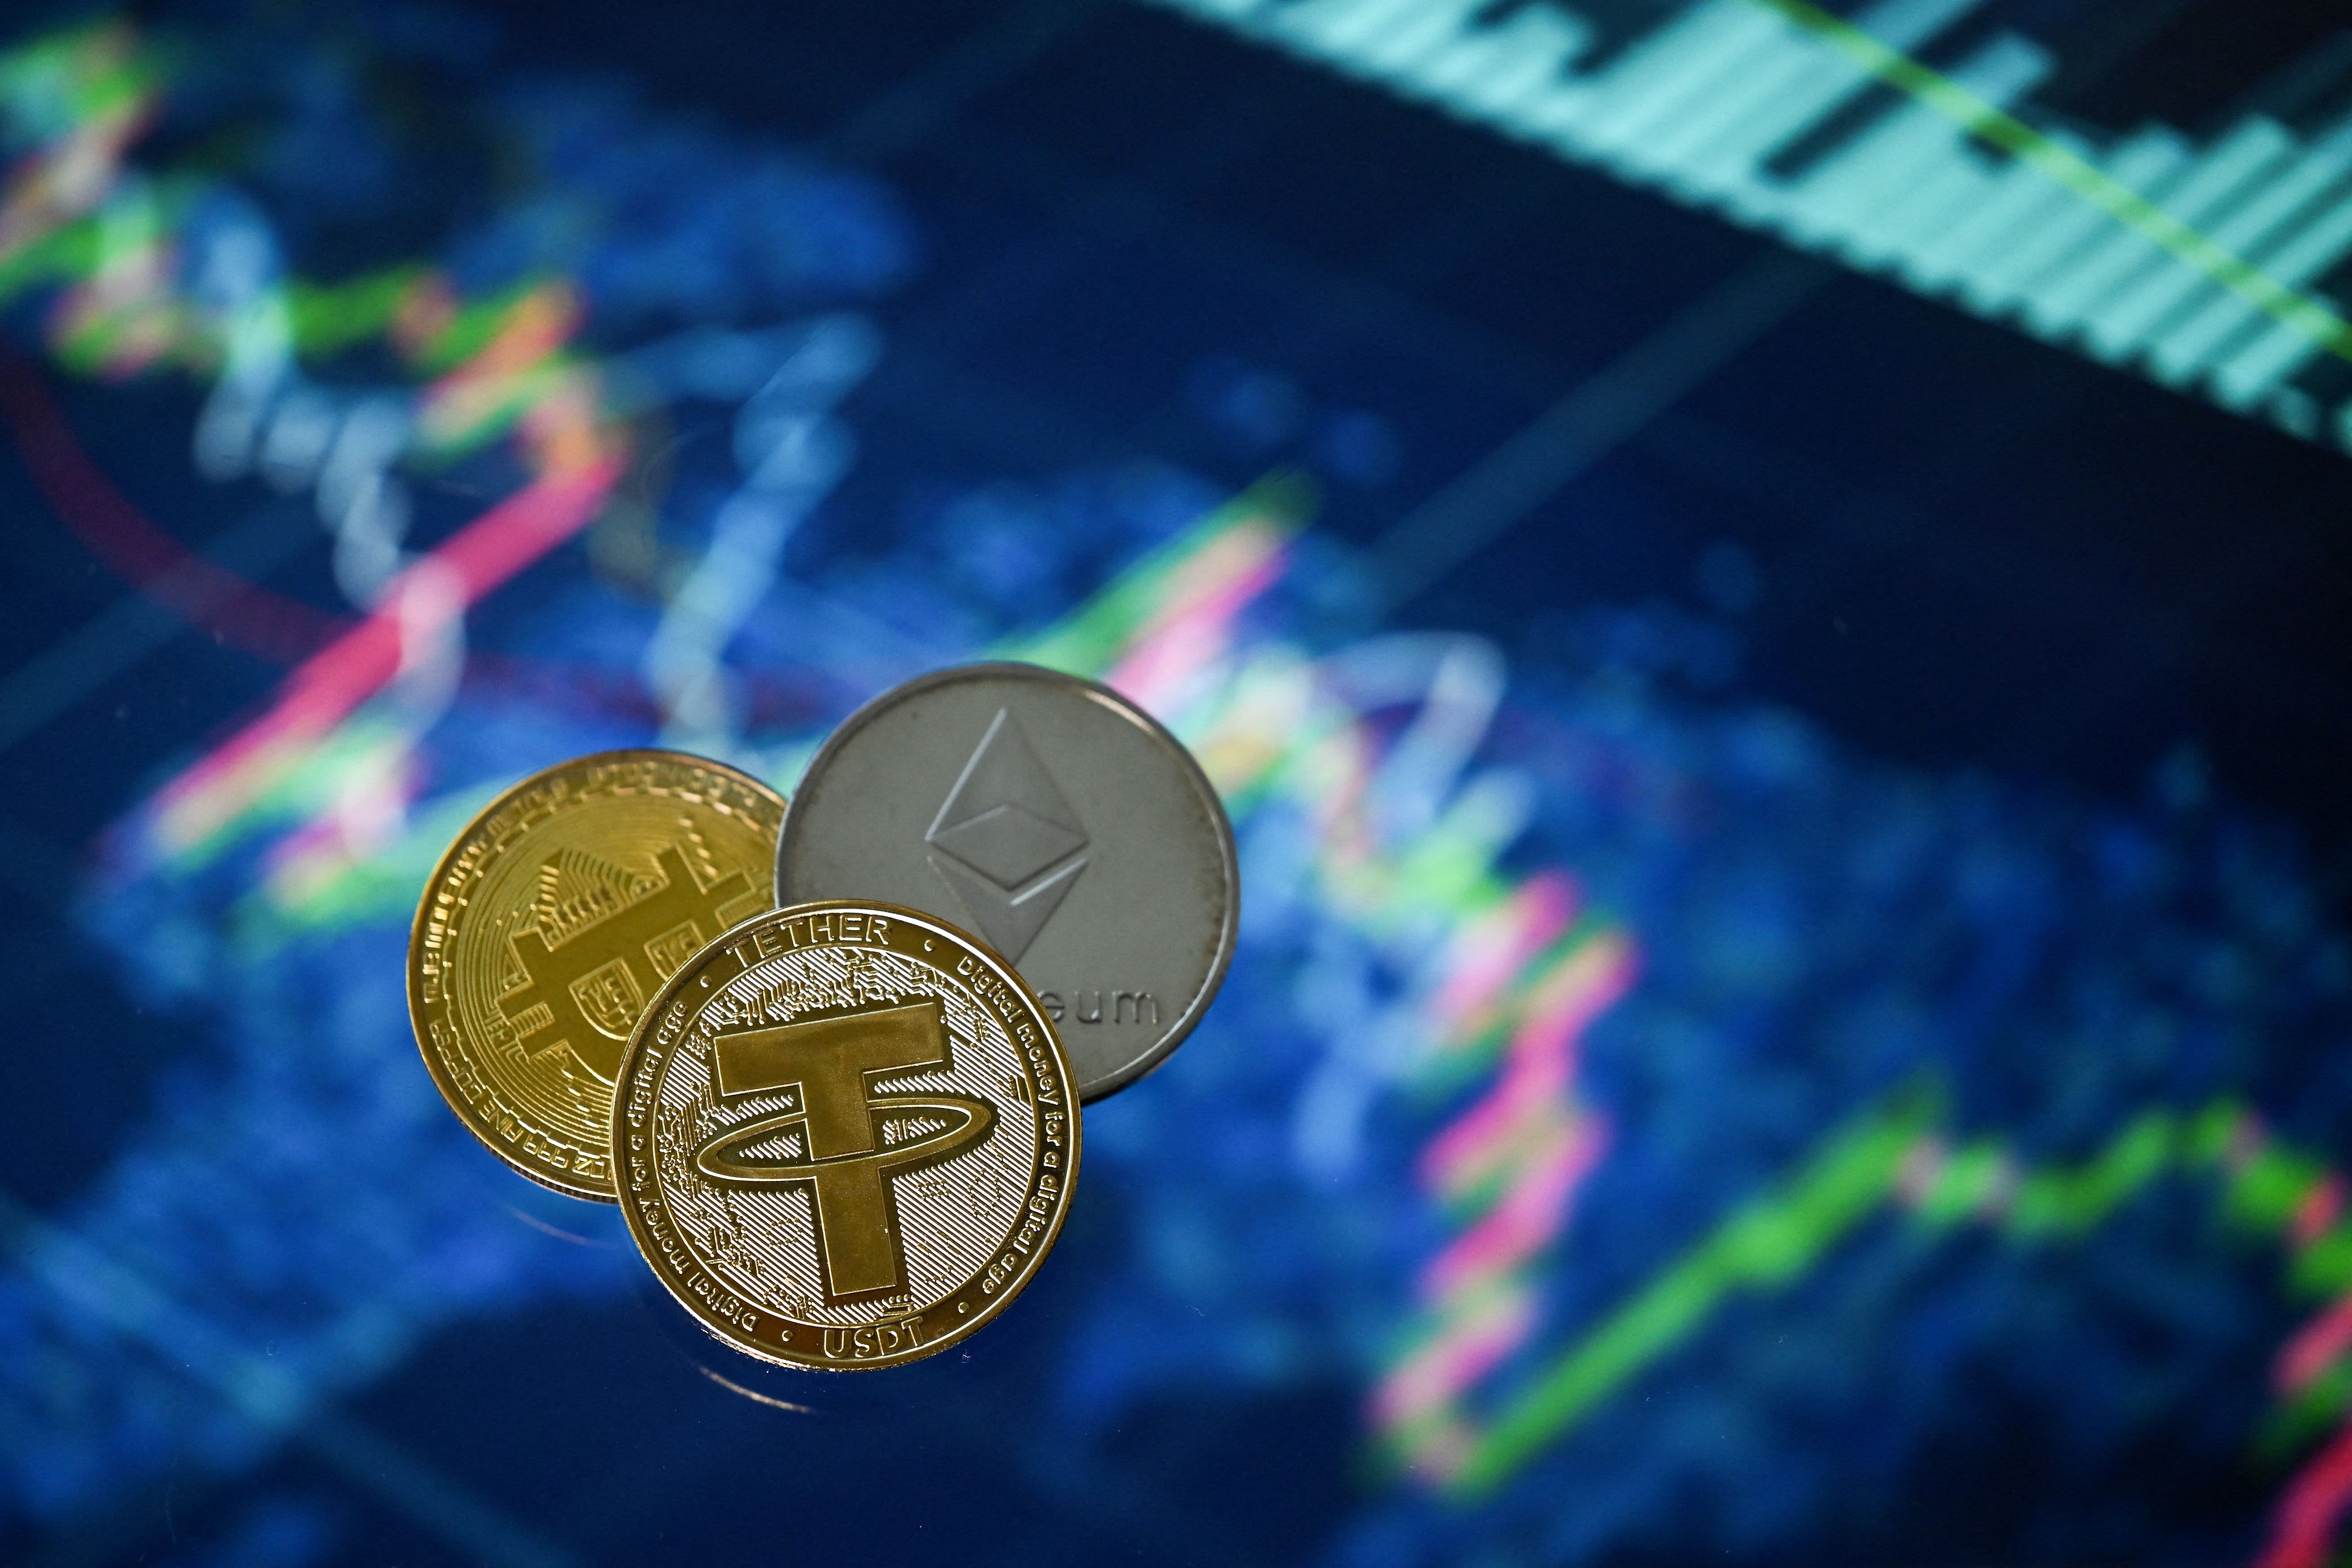 Bitcoin Funds Set New Precedent for Crypto (k), IRA Investing